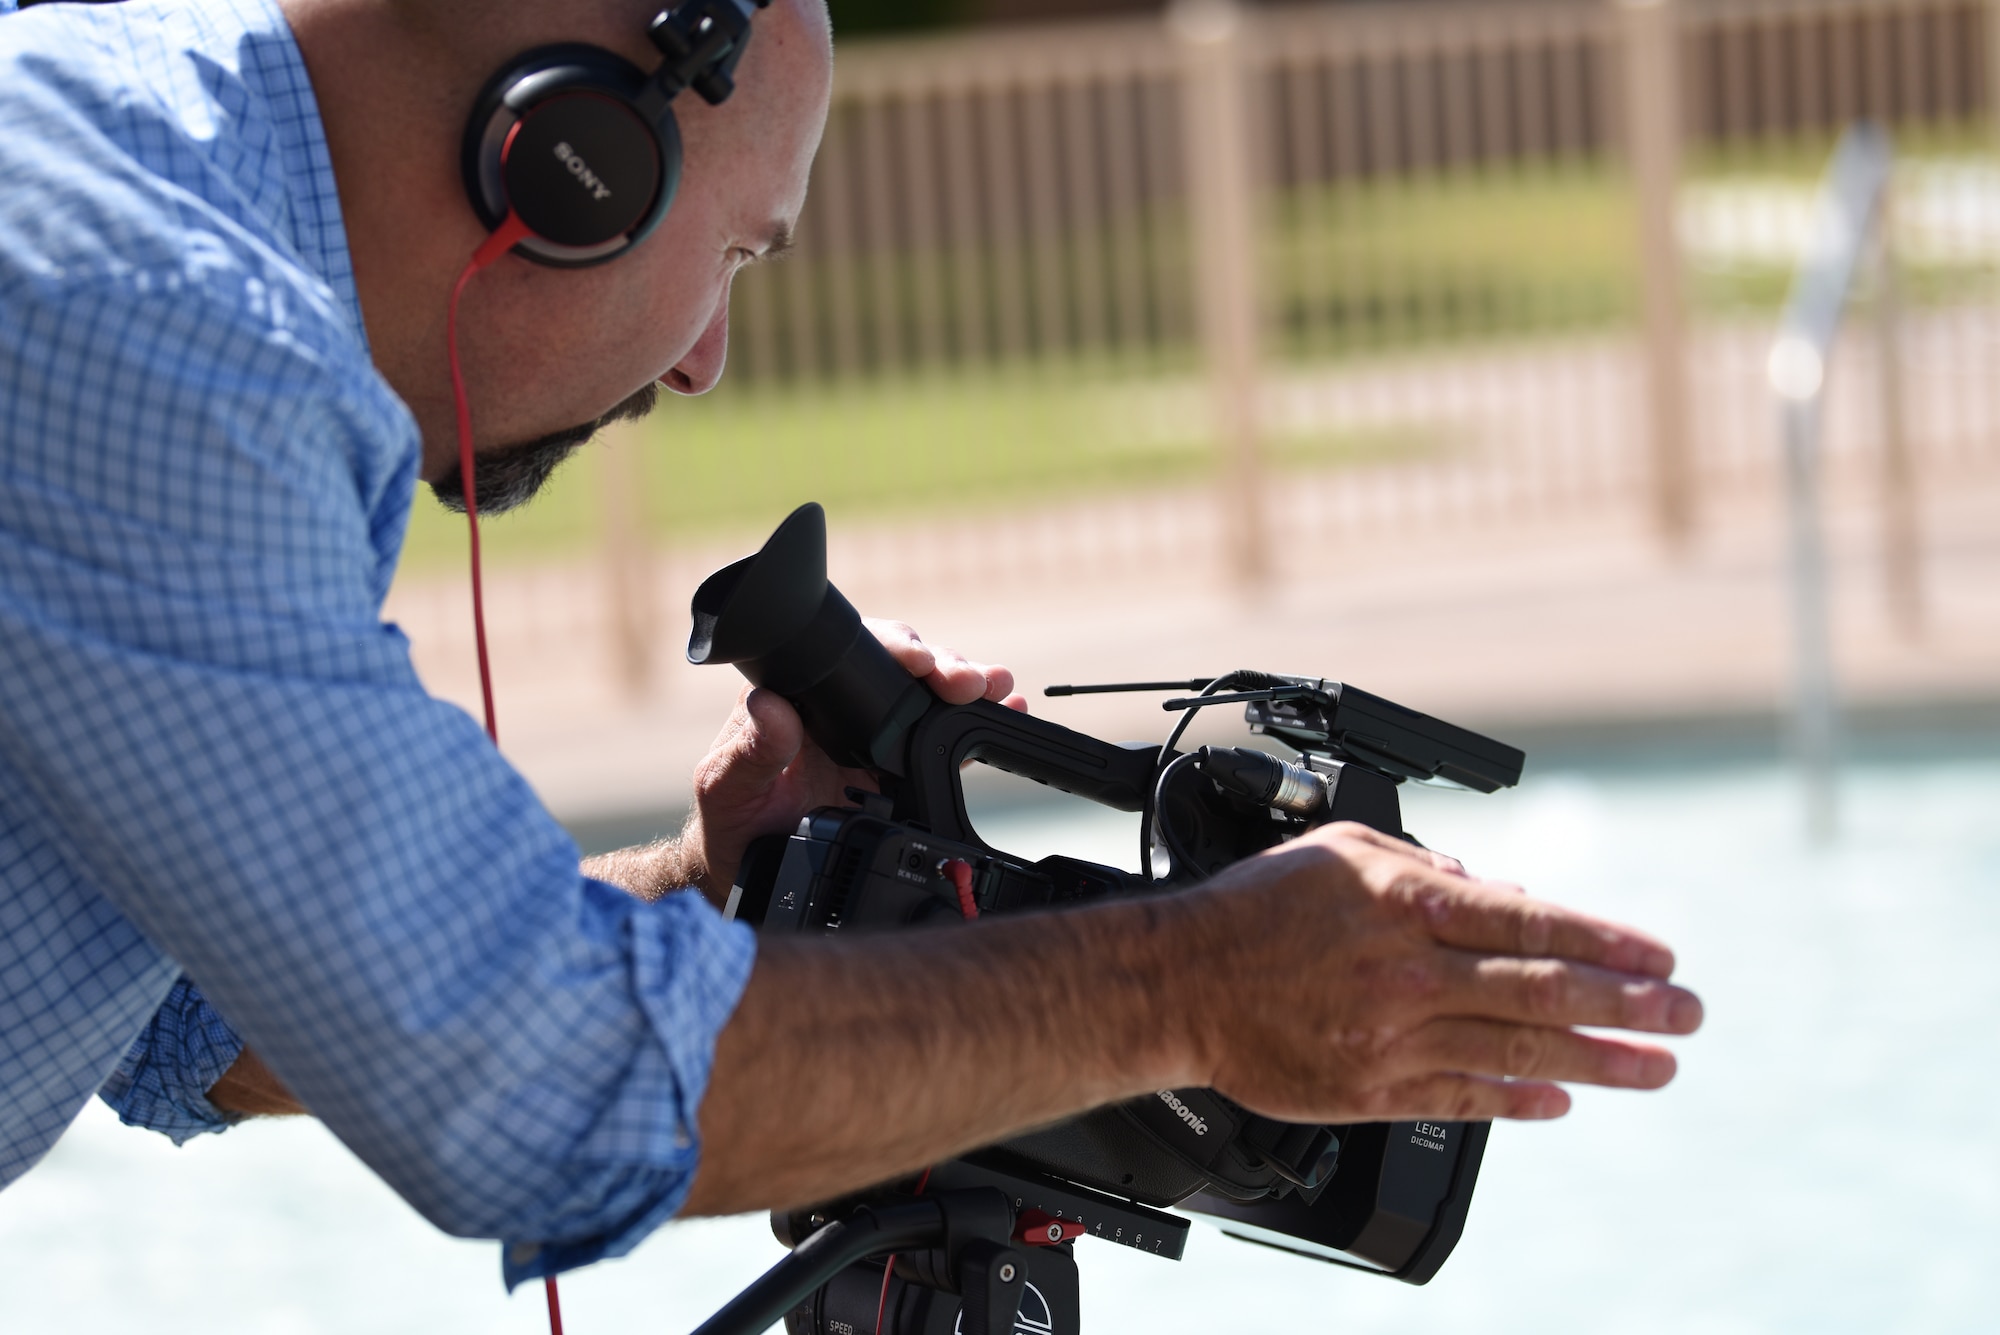 Keith Wright, Air Force Safety Center Public Affairs deputy chief, films a public service announcement on riptides at Kirtland Air Force Base, N.M., July 11, 2019. The PSA will be shown on social media, the Armed Forces Network and online. (U.S. Air Force photo by Senior Airman Eli Chevalier)